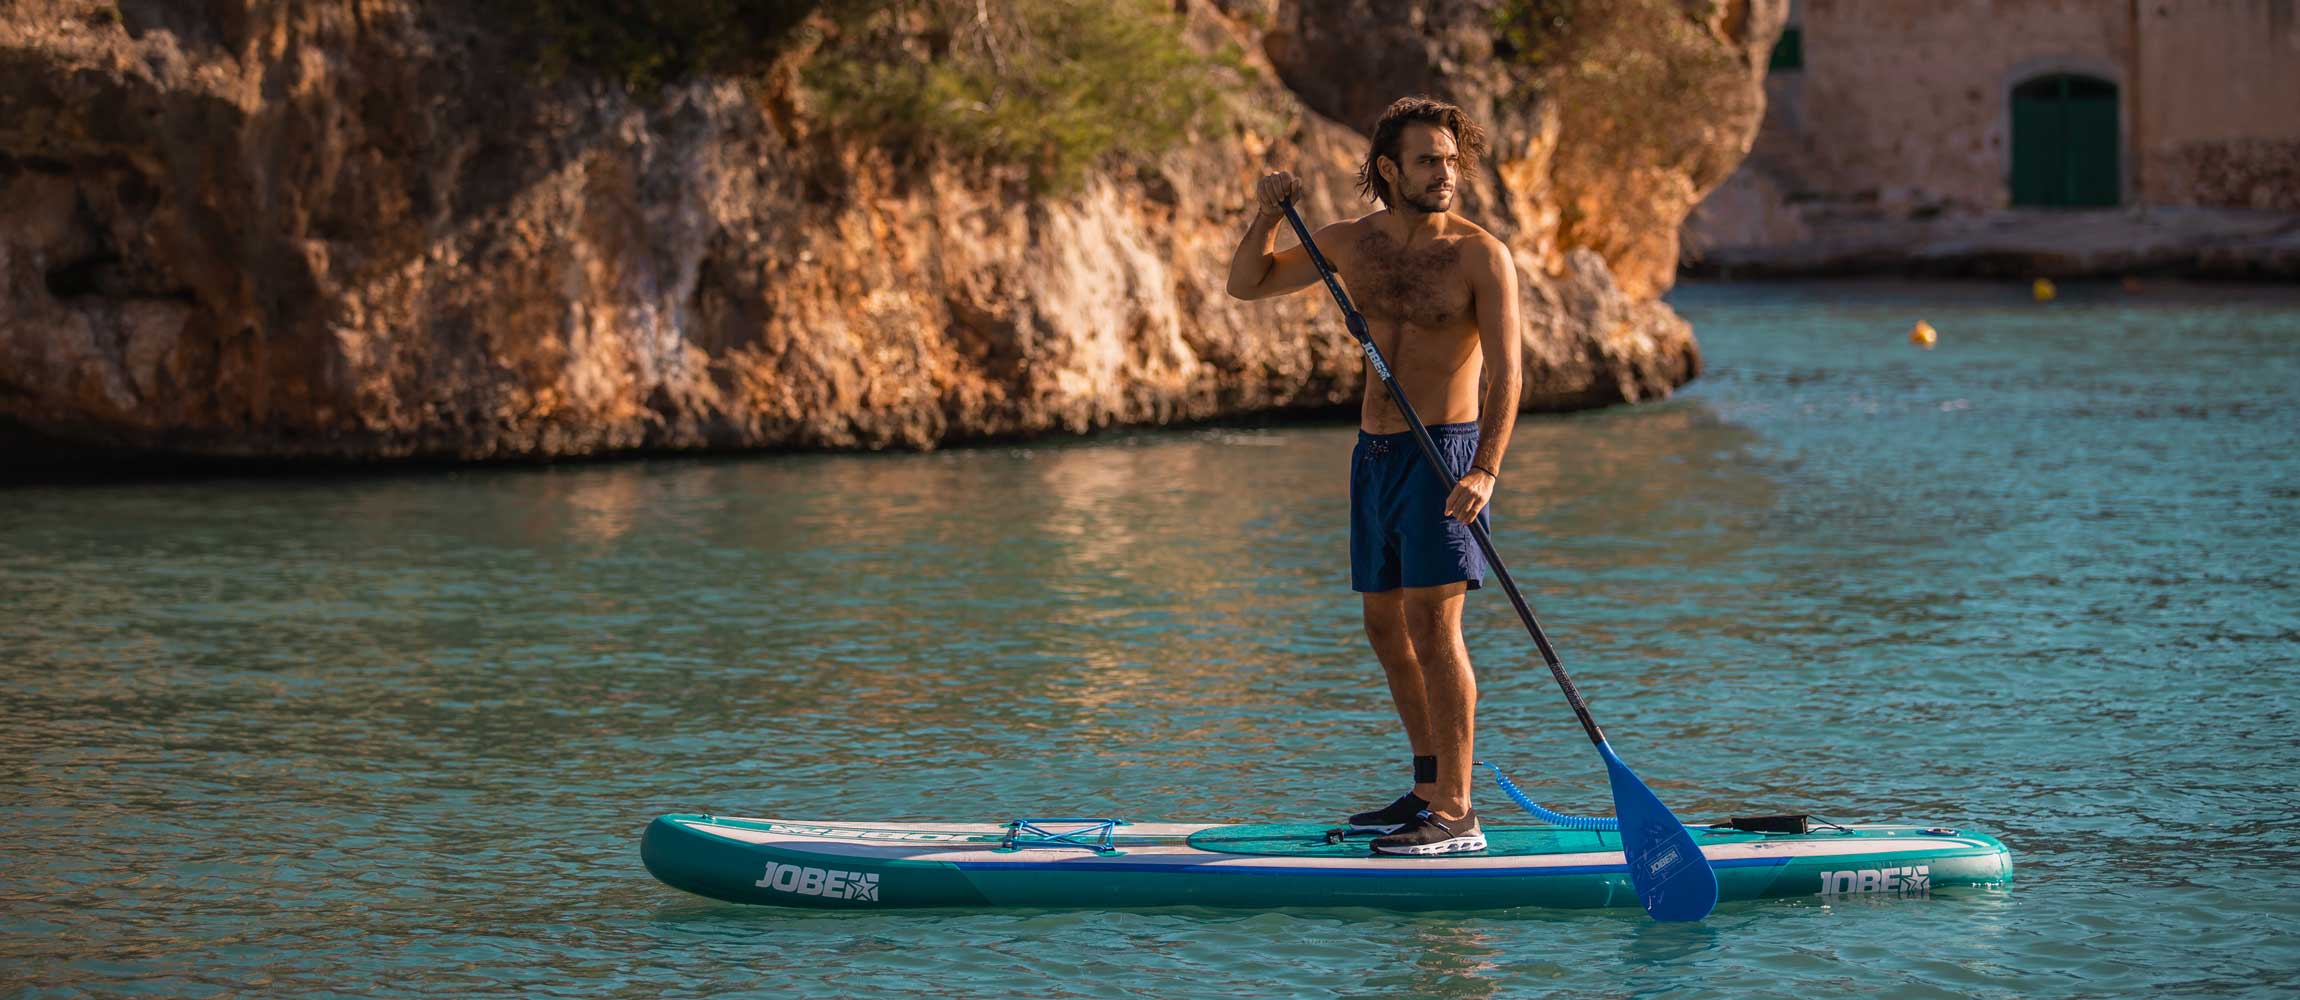 Jobe inflatable paddle board